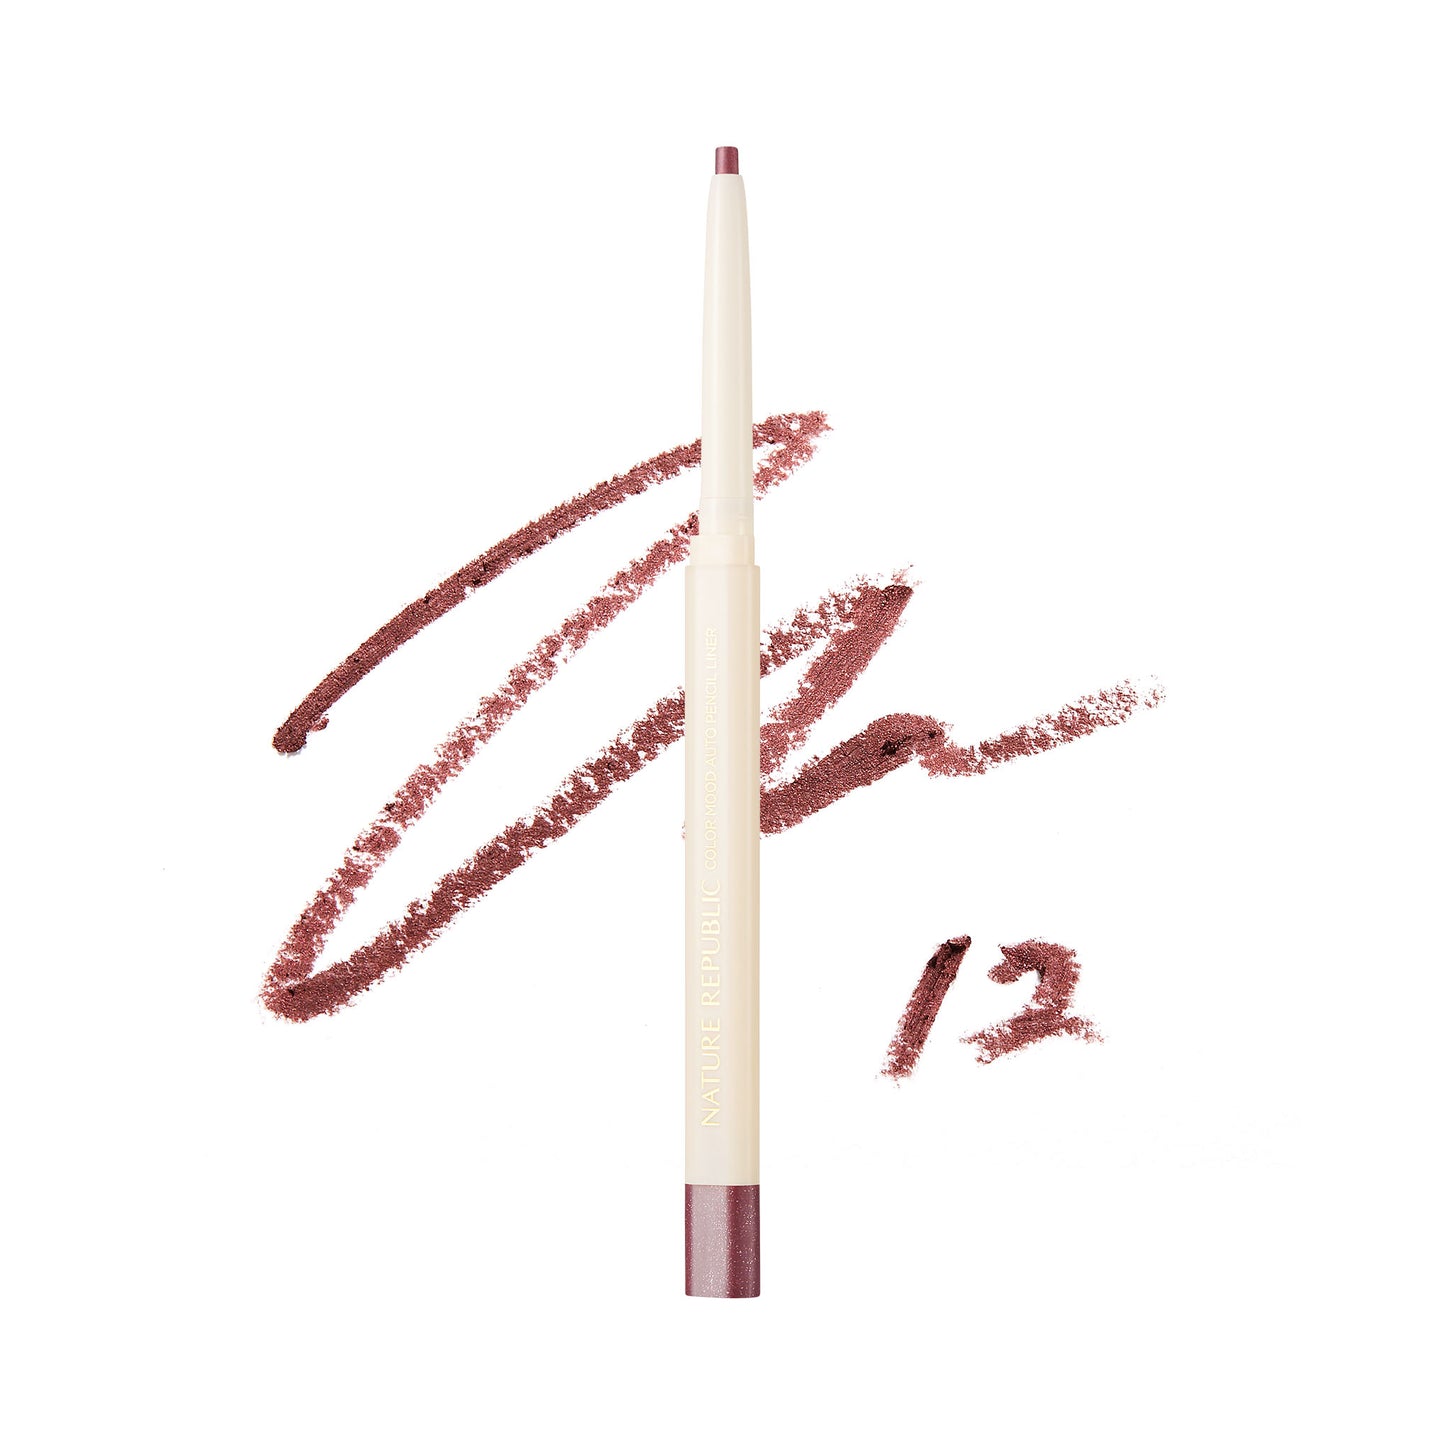 BOTANICAL Color Mood Auto Pencil Liner 12 Winery Rose